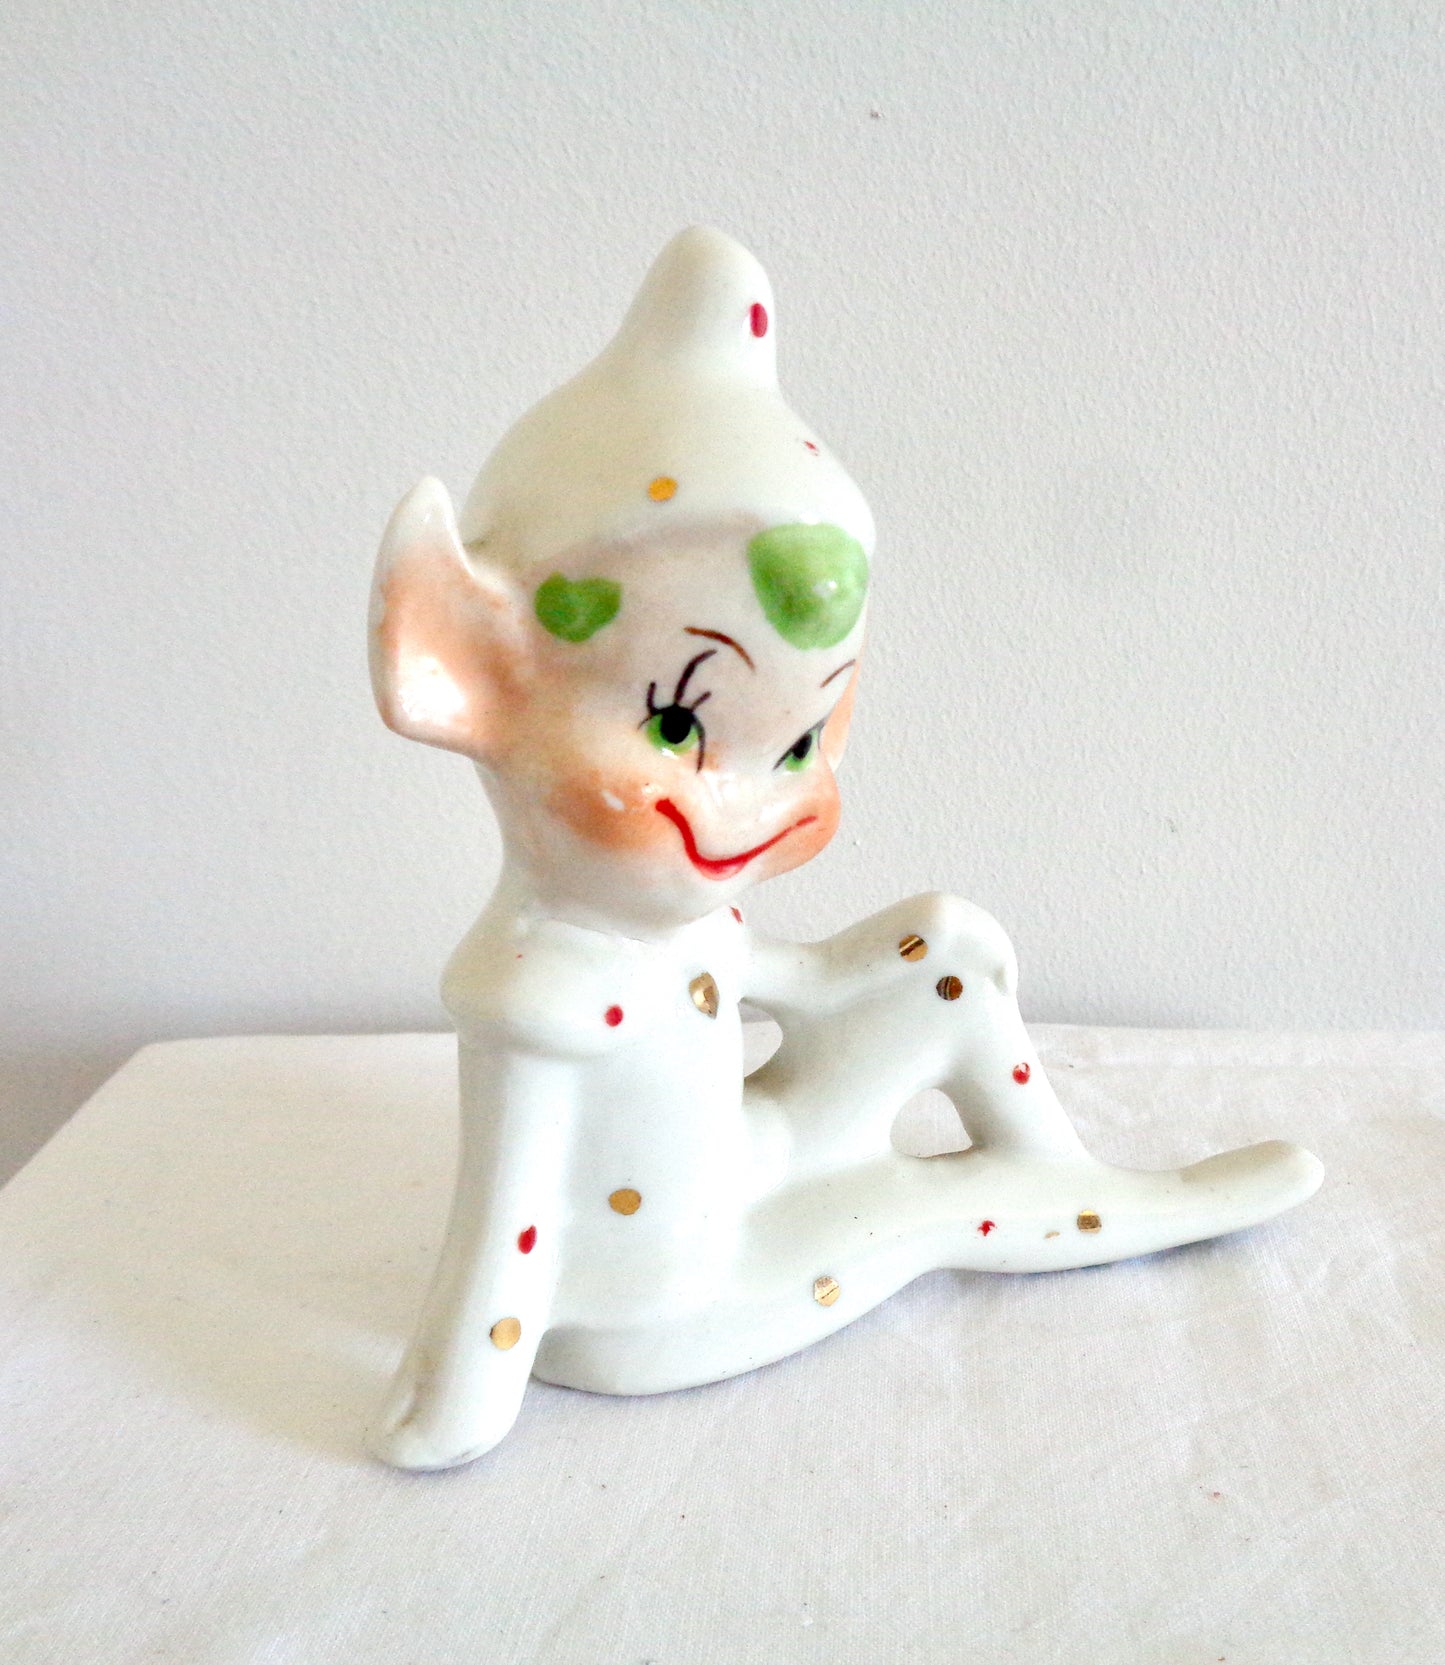 Vintage Pottery Elf / Pixie Made in the Irish Republic